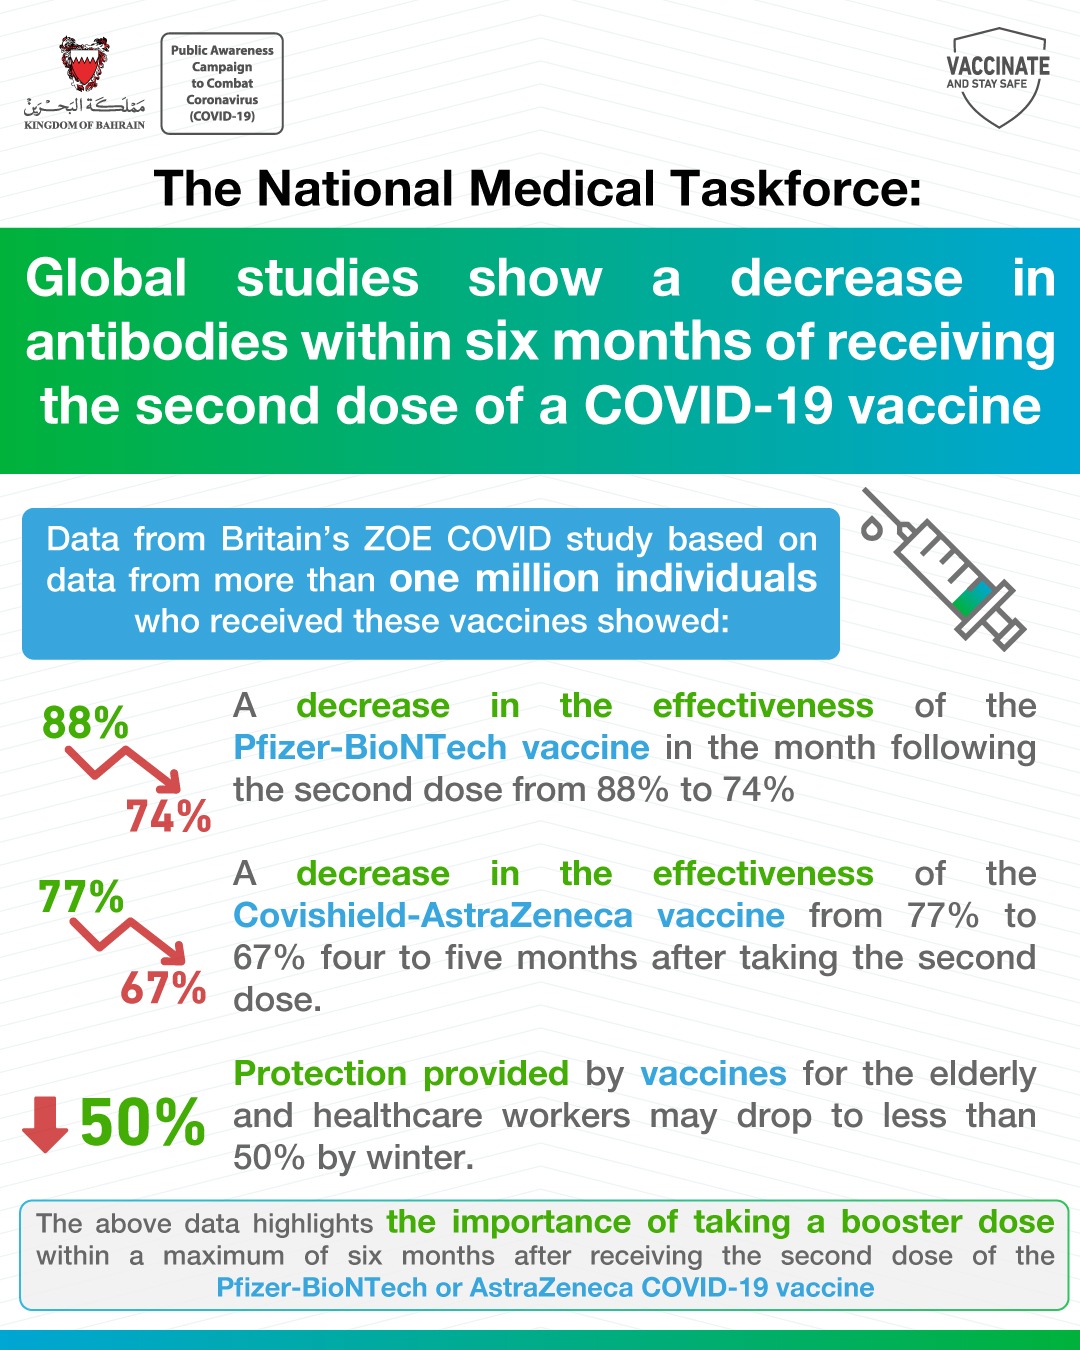 Global studies show a decrease in antibodies within six months of receiving the second dose of a COVID-19 vaccine